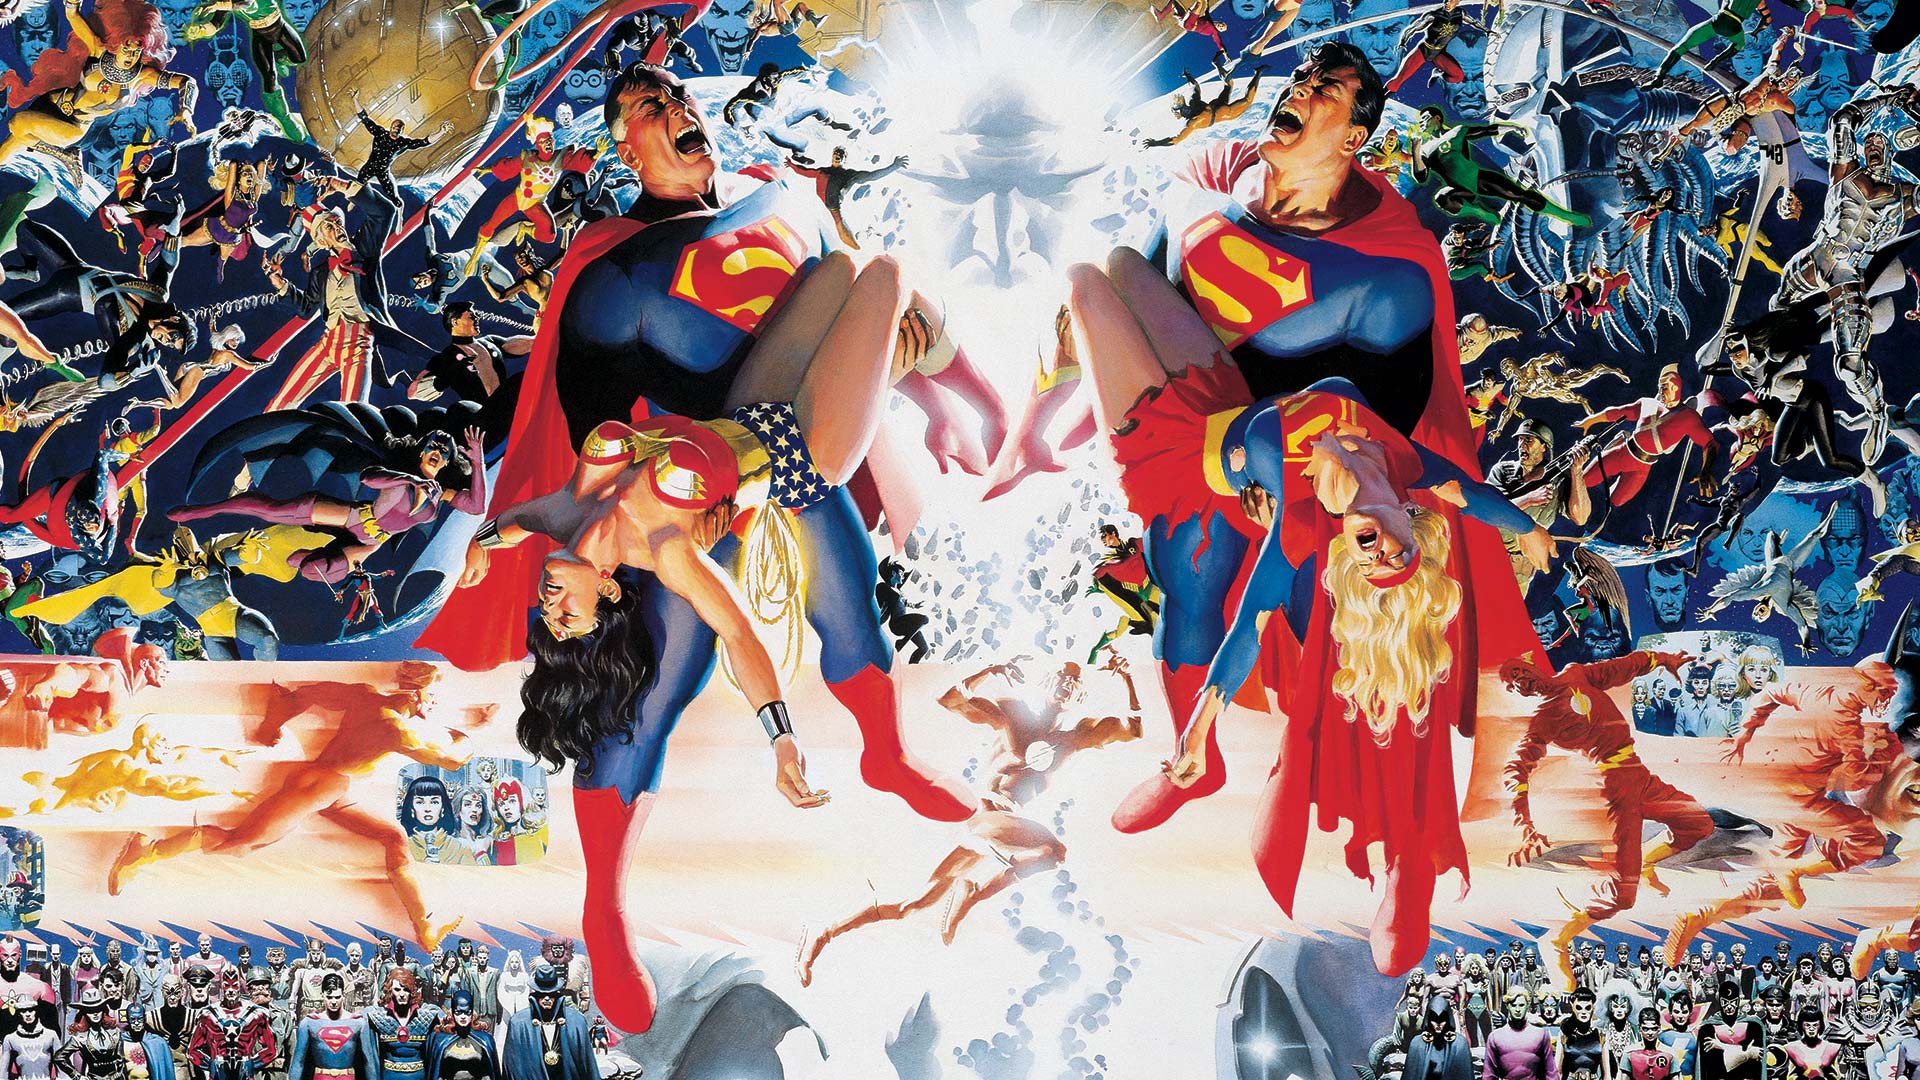 What You Need To Know About Crisis On Infinite Earths Before